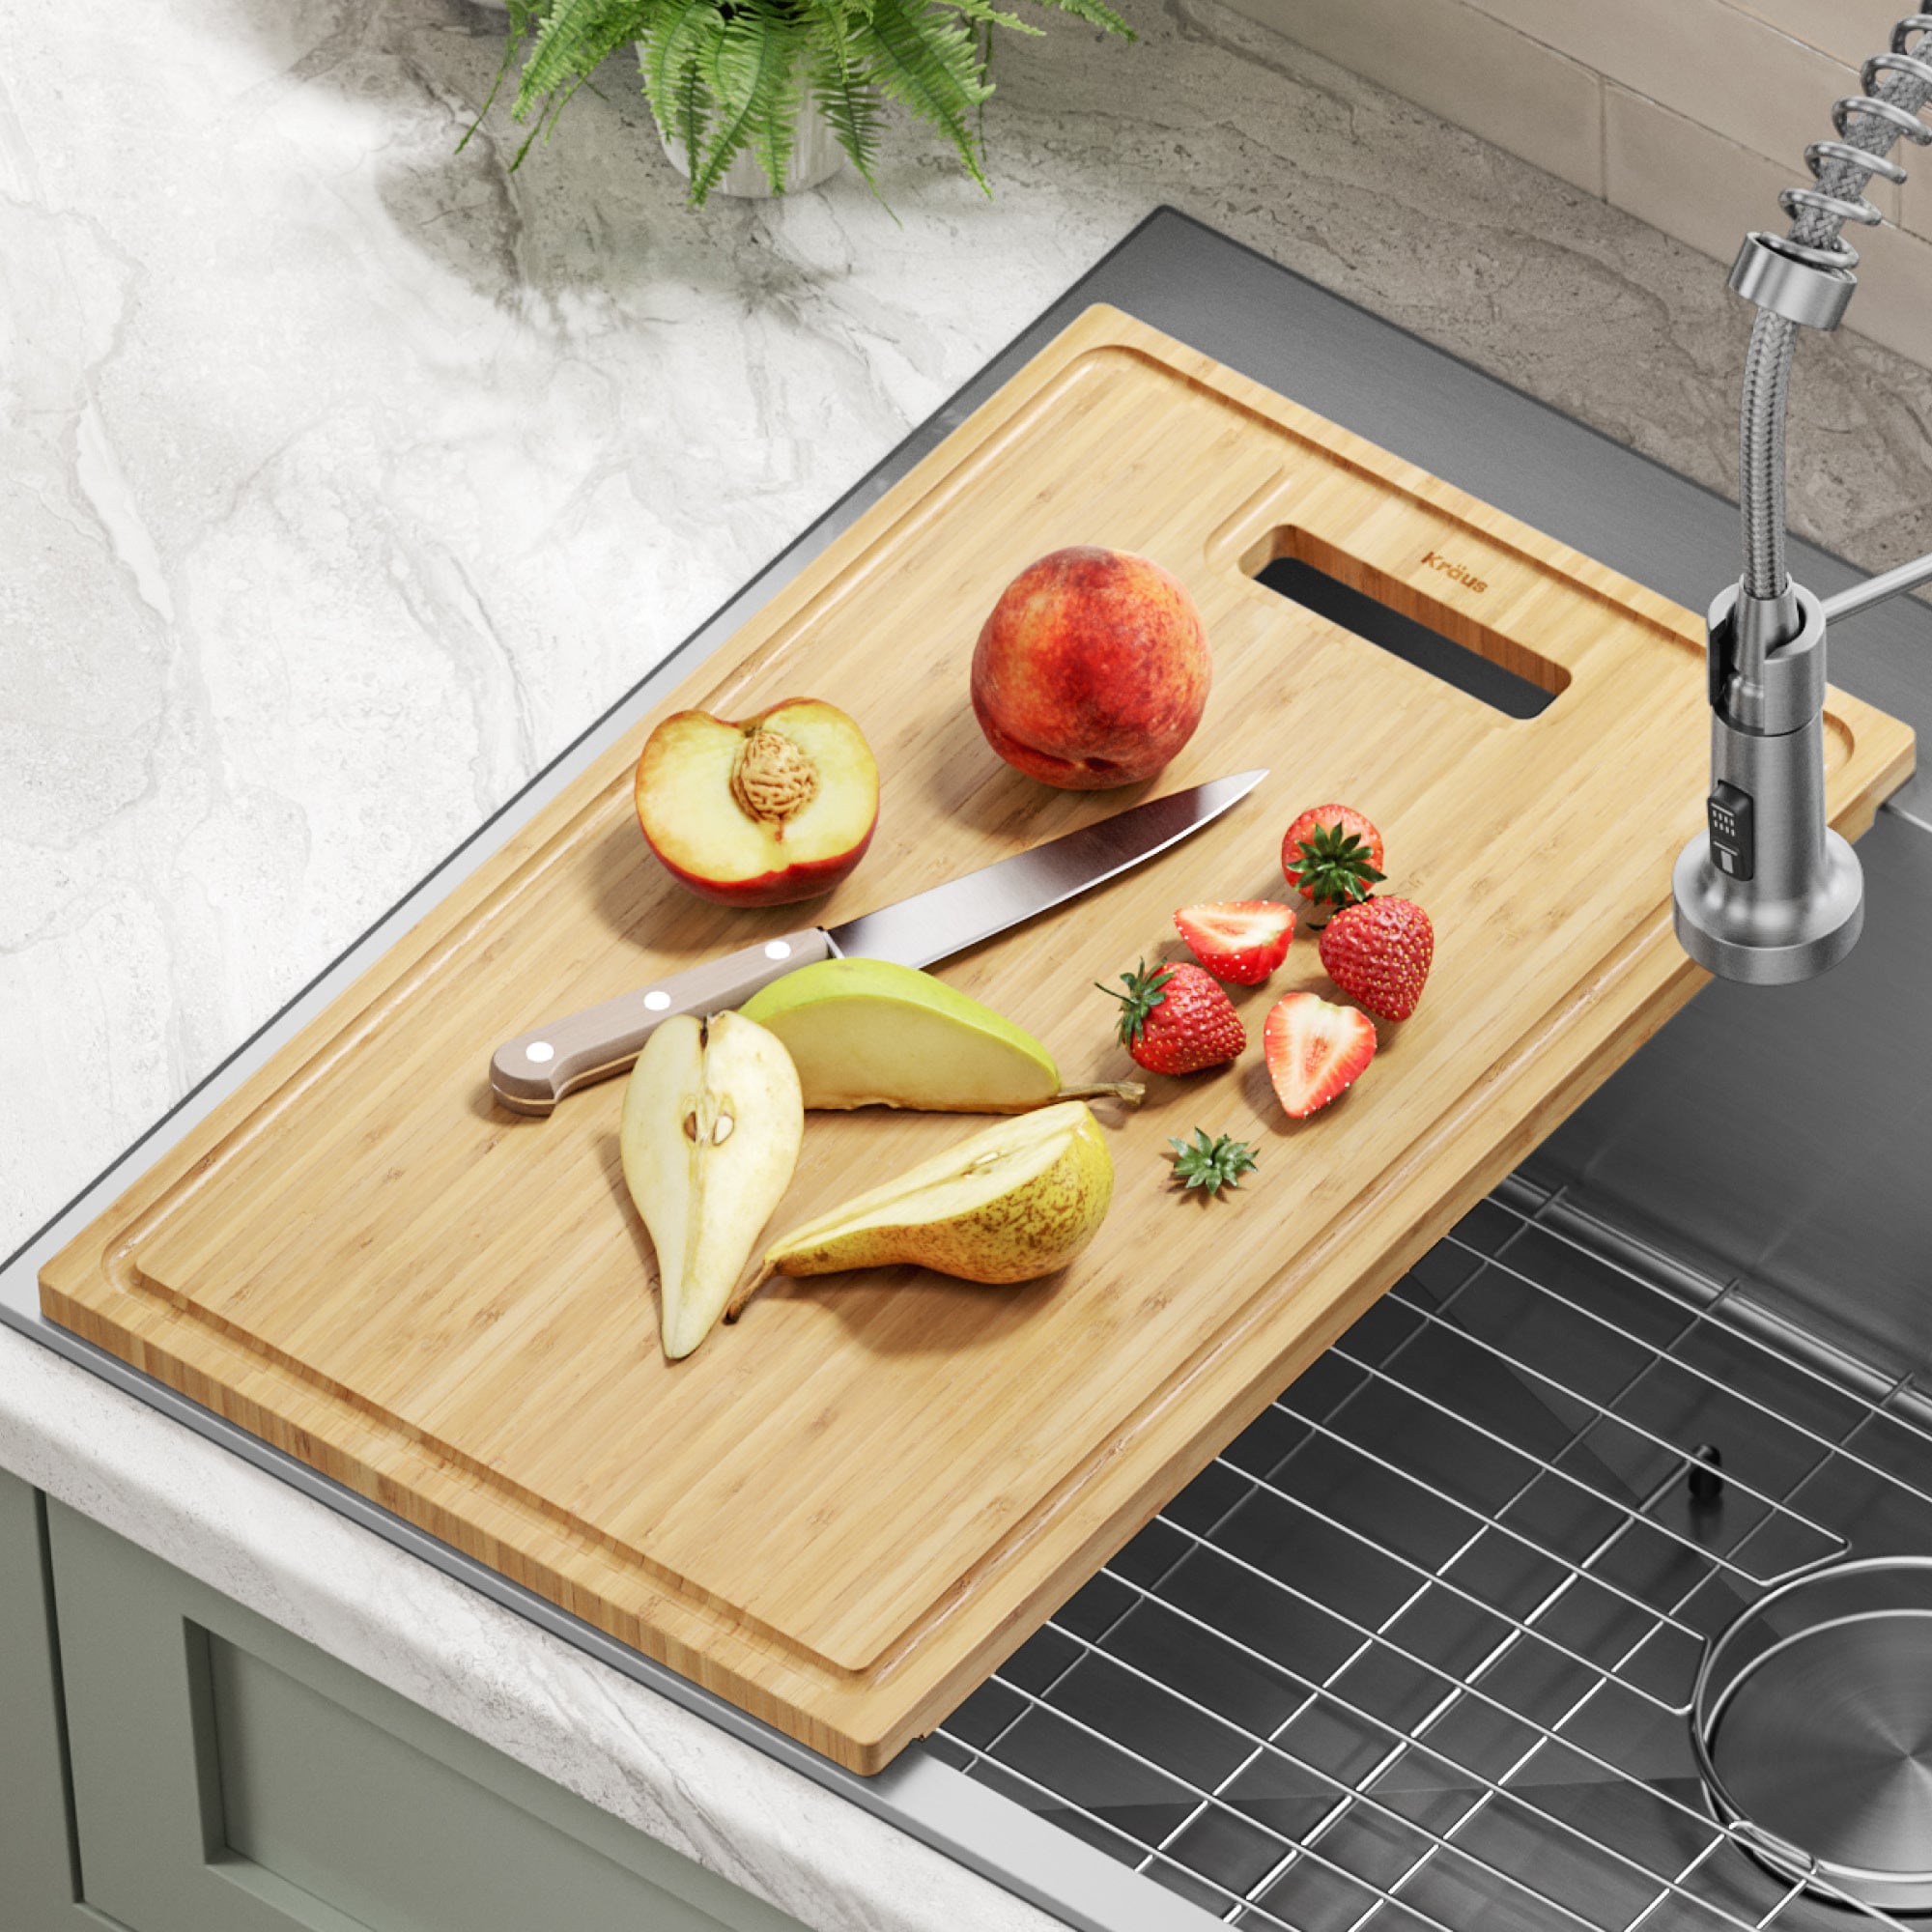 Wood Cutting Boards for Kitchen Sinks